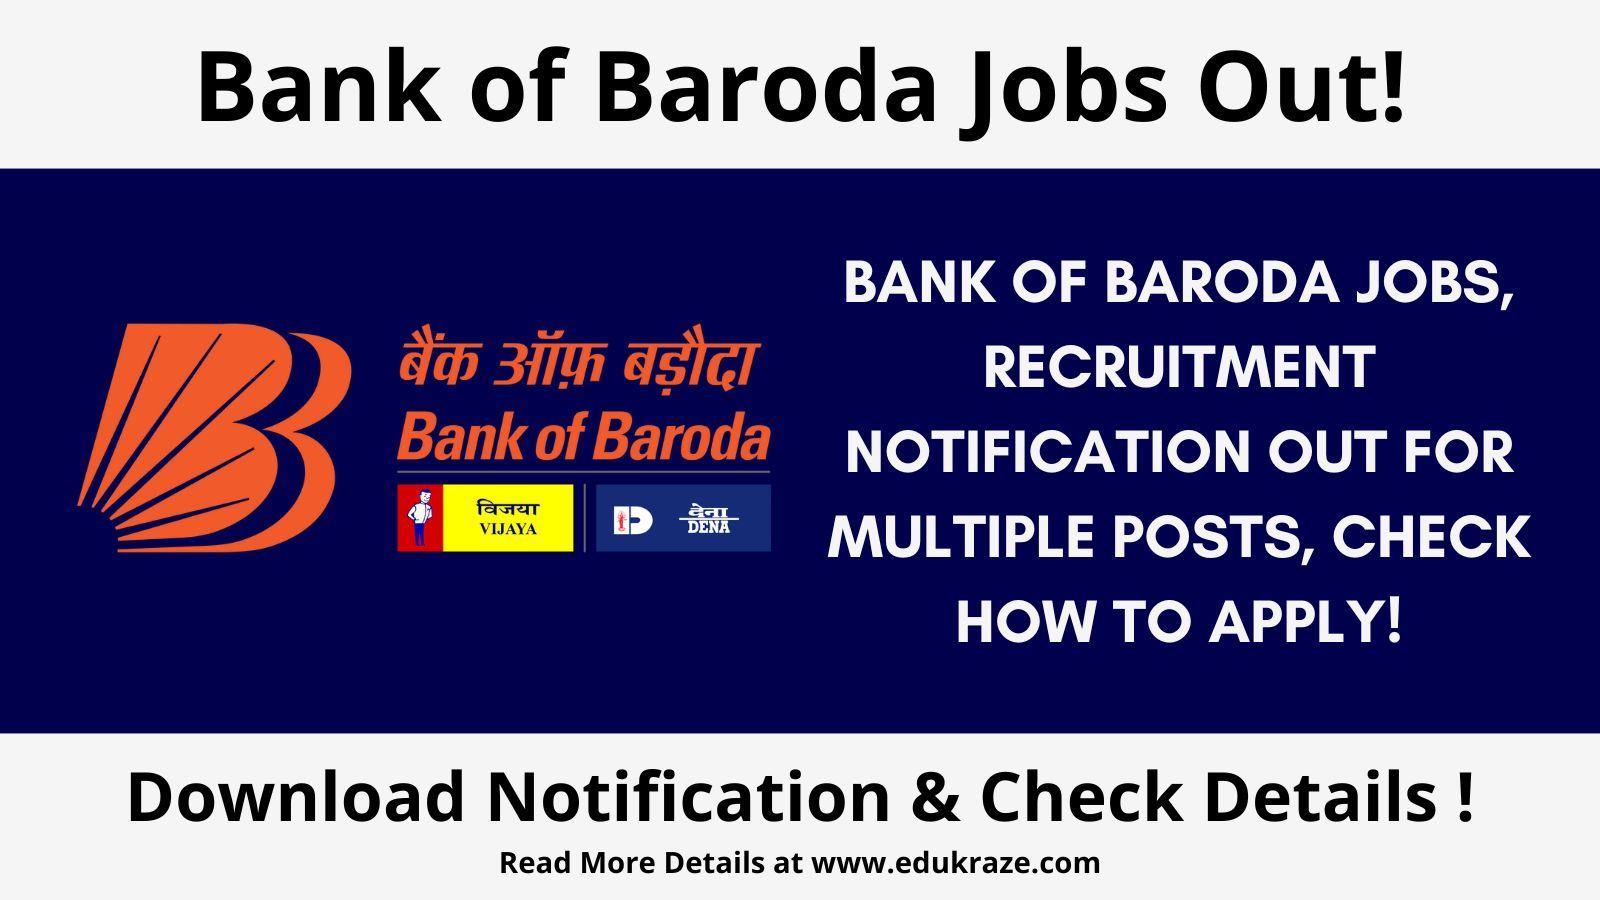 Bank of Baroda Jobs, Recruitment Notification Out for Multiple Posts, Check how to Apply!